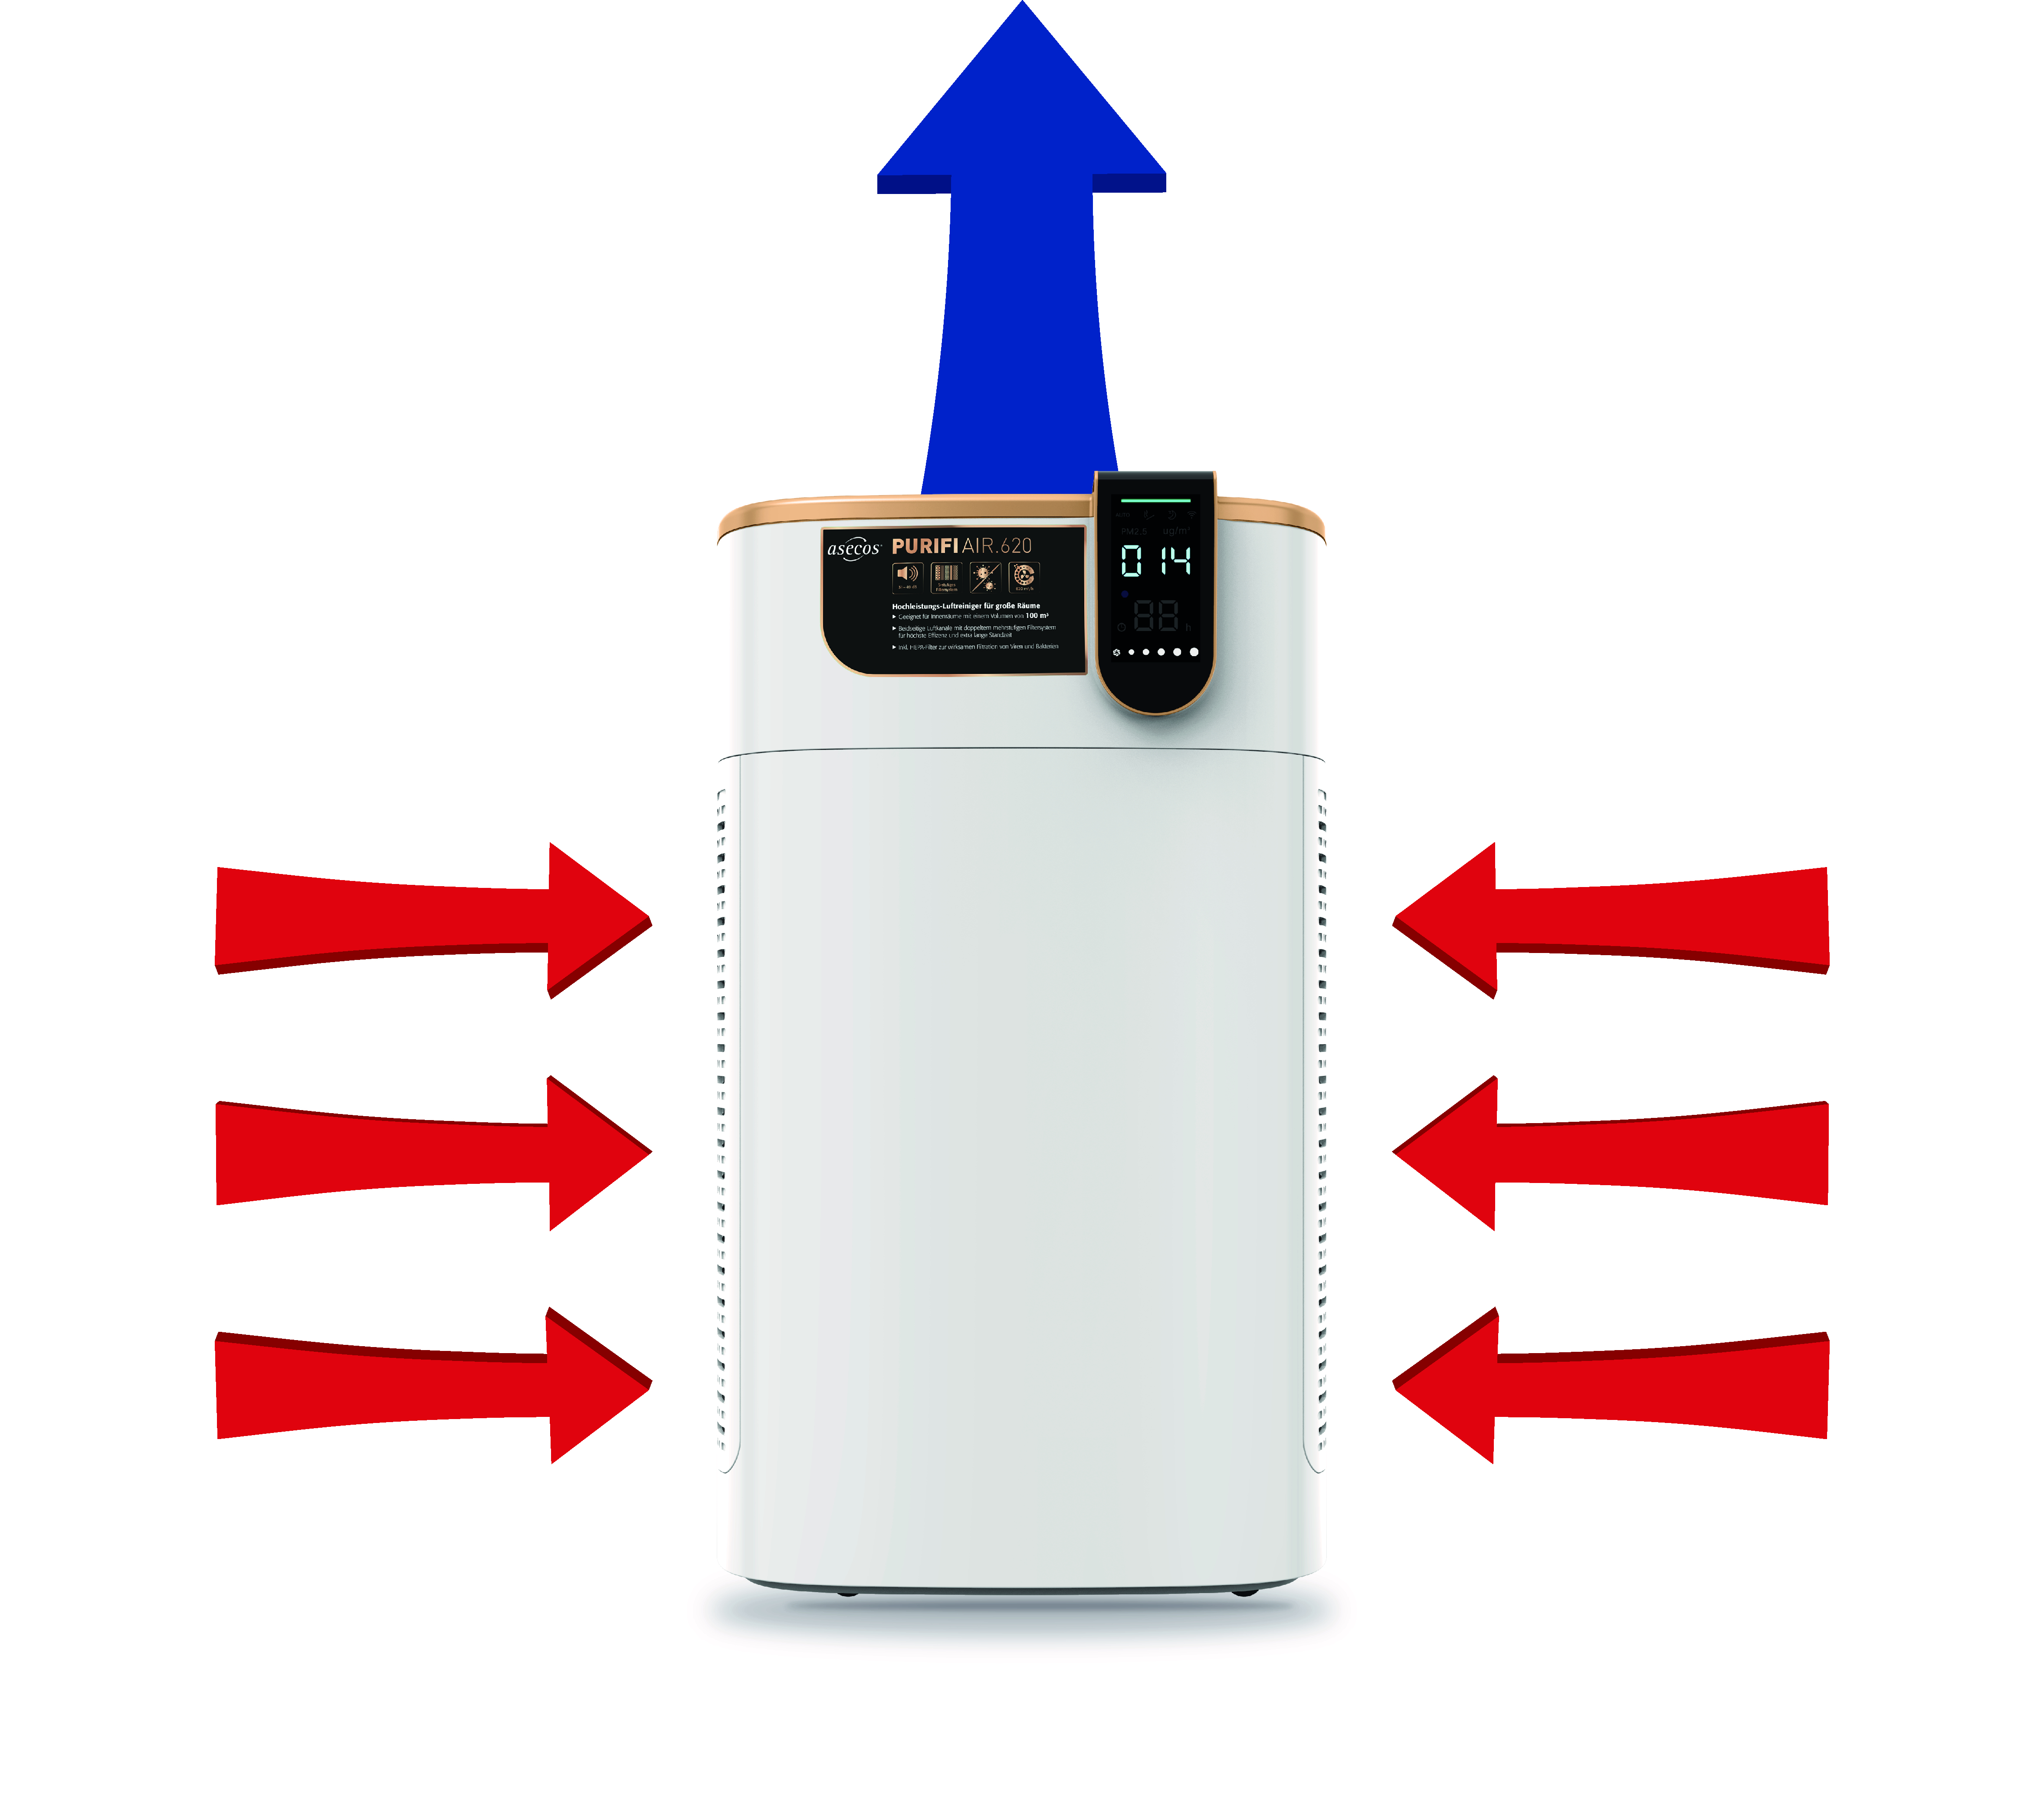 A white air purifier with arrows indicating air in and out